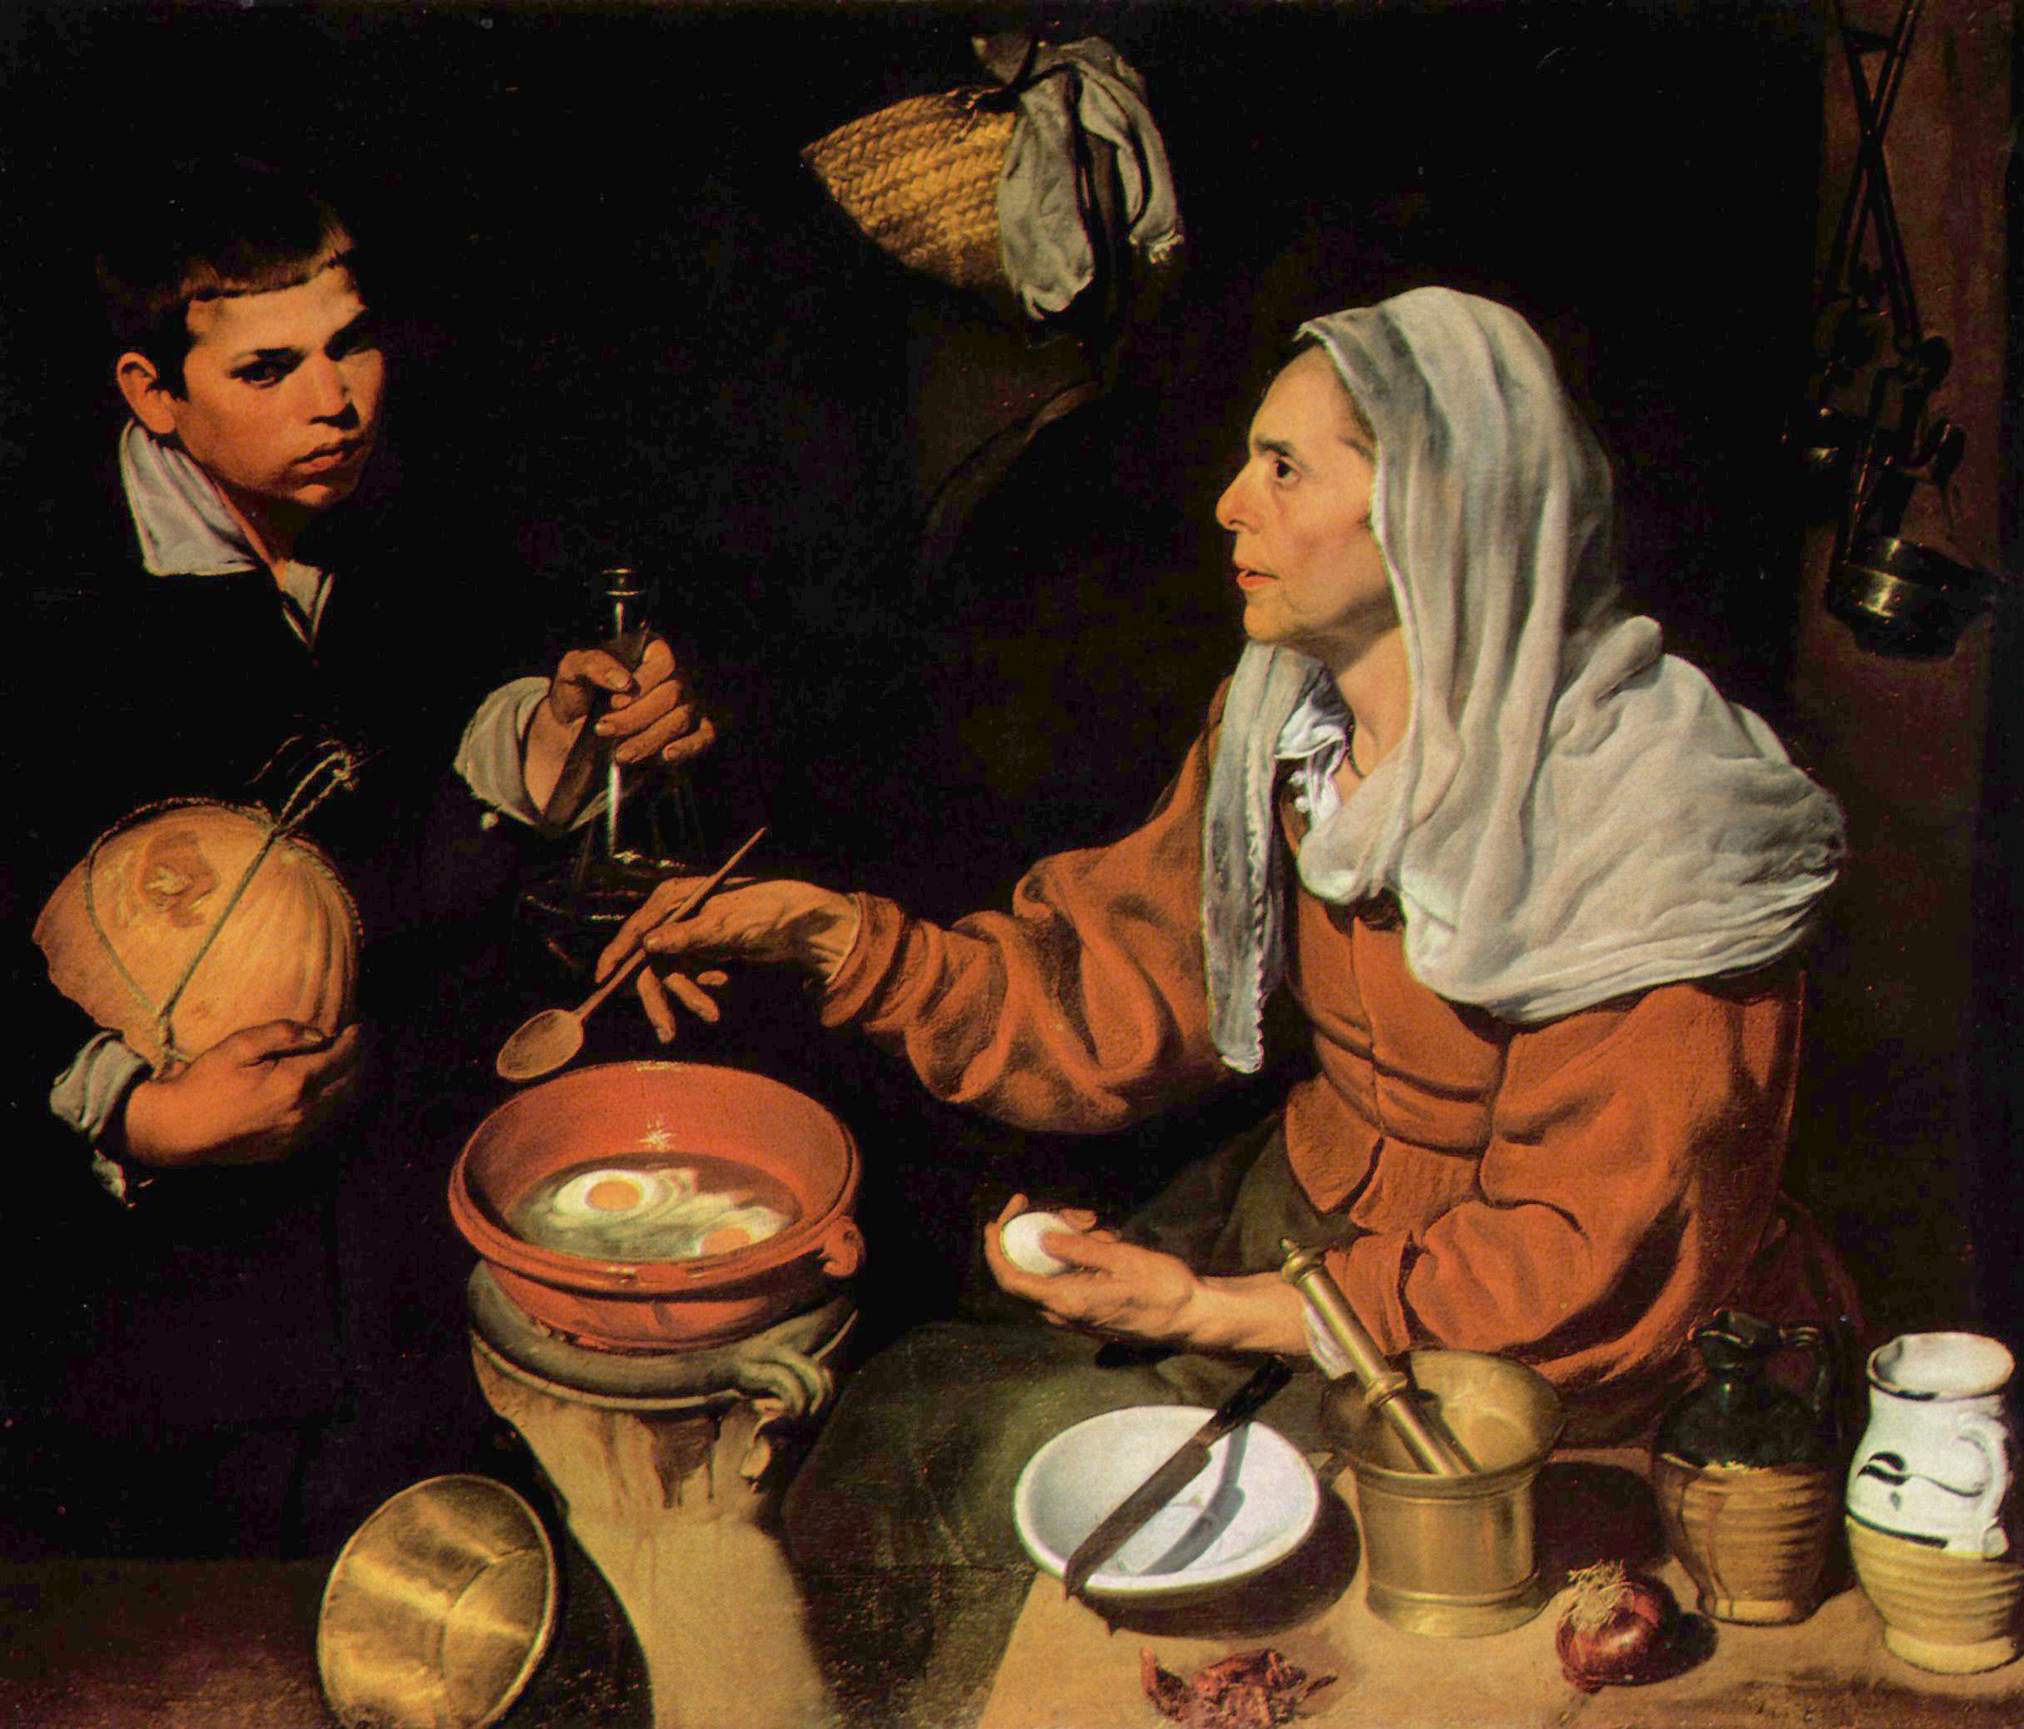 Old Woman Frying Eggs by Diego Velázquez - c. 1618 - 105 × 119 cm National Galleries of Scotland